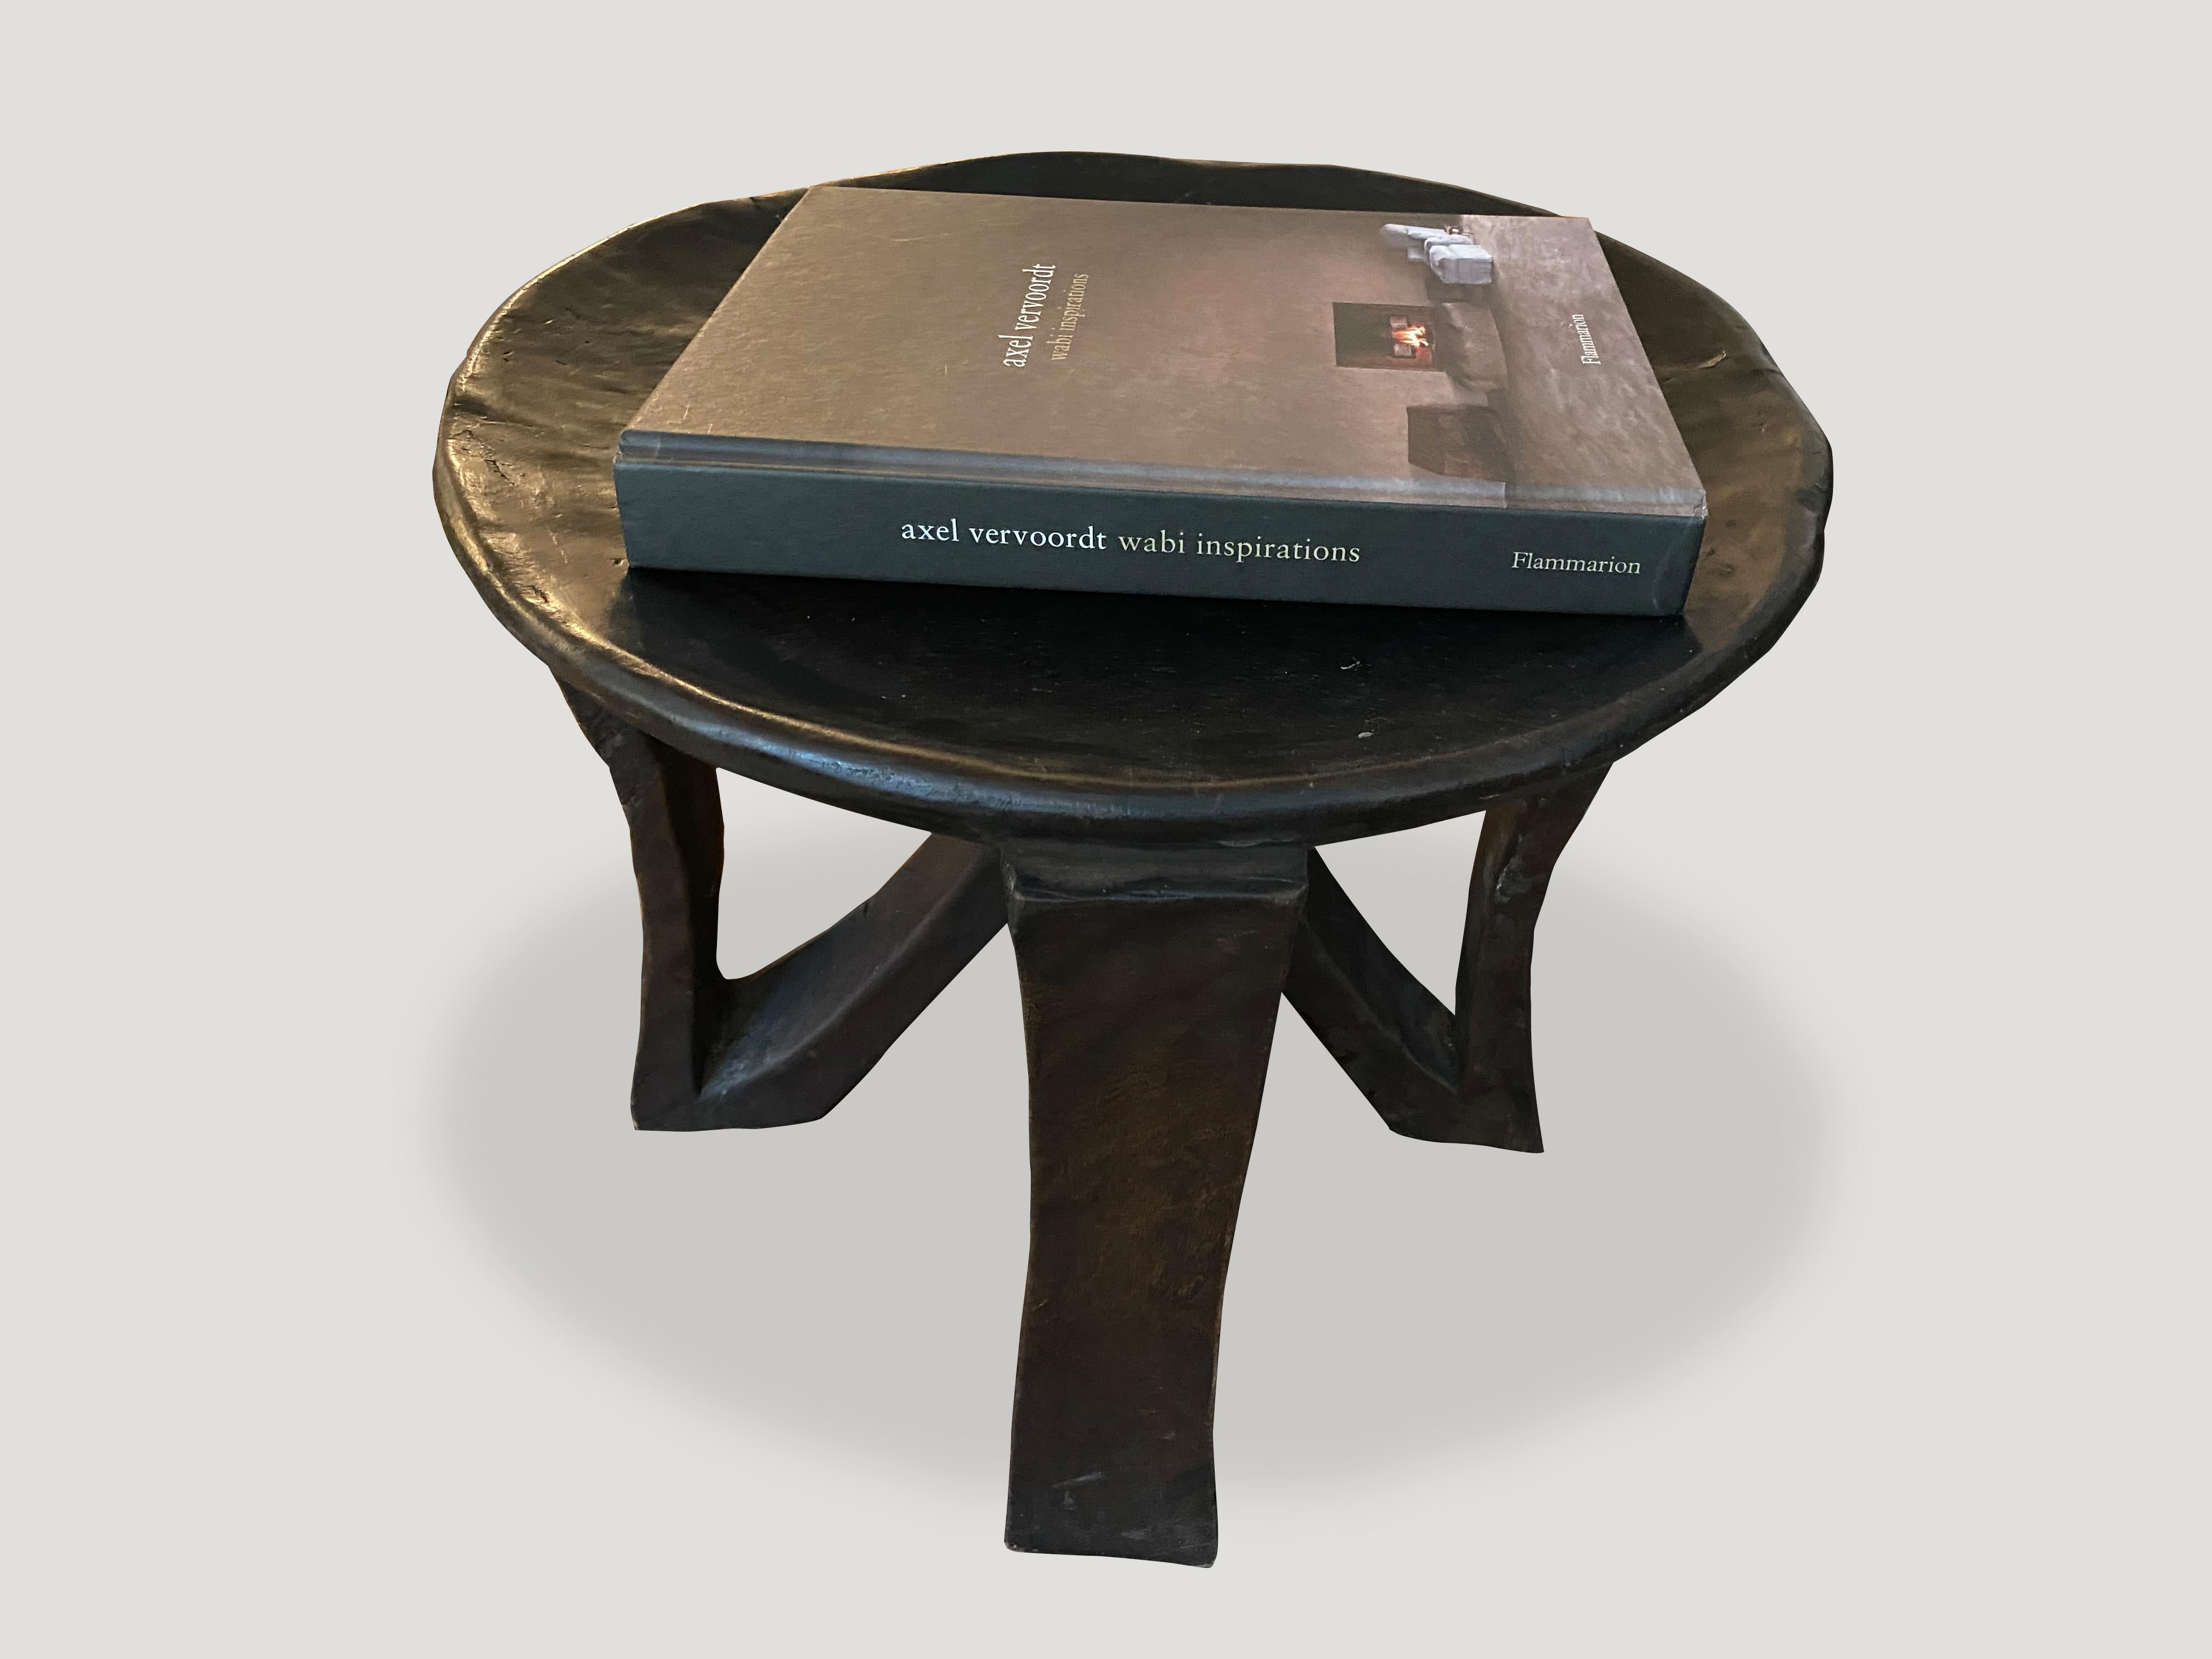 Hand carved from a single block of mahogany wood, an African mahogany side table or bowl. Great for placing a book or perhaps towels in a bathroom, magazines etc. A beautiful, versatile item that is both sculptural and usable. 

This side table or